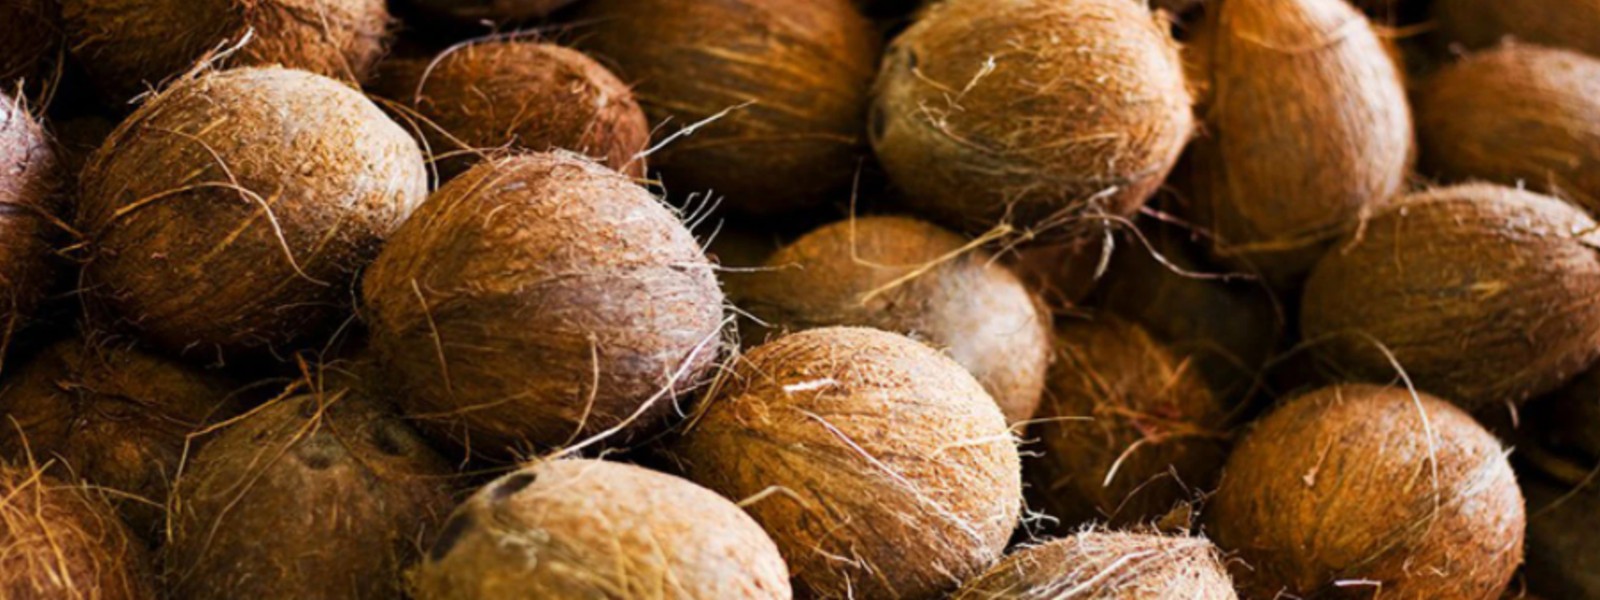 CAA raids traders selling coconuts above MRP; State Minister to address measuring issue